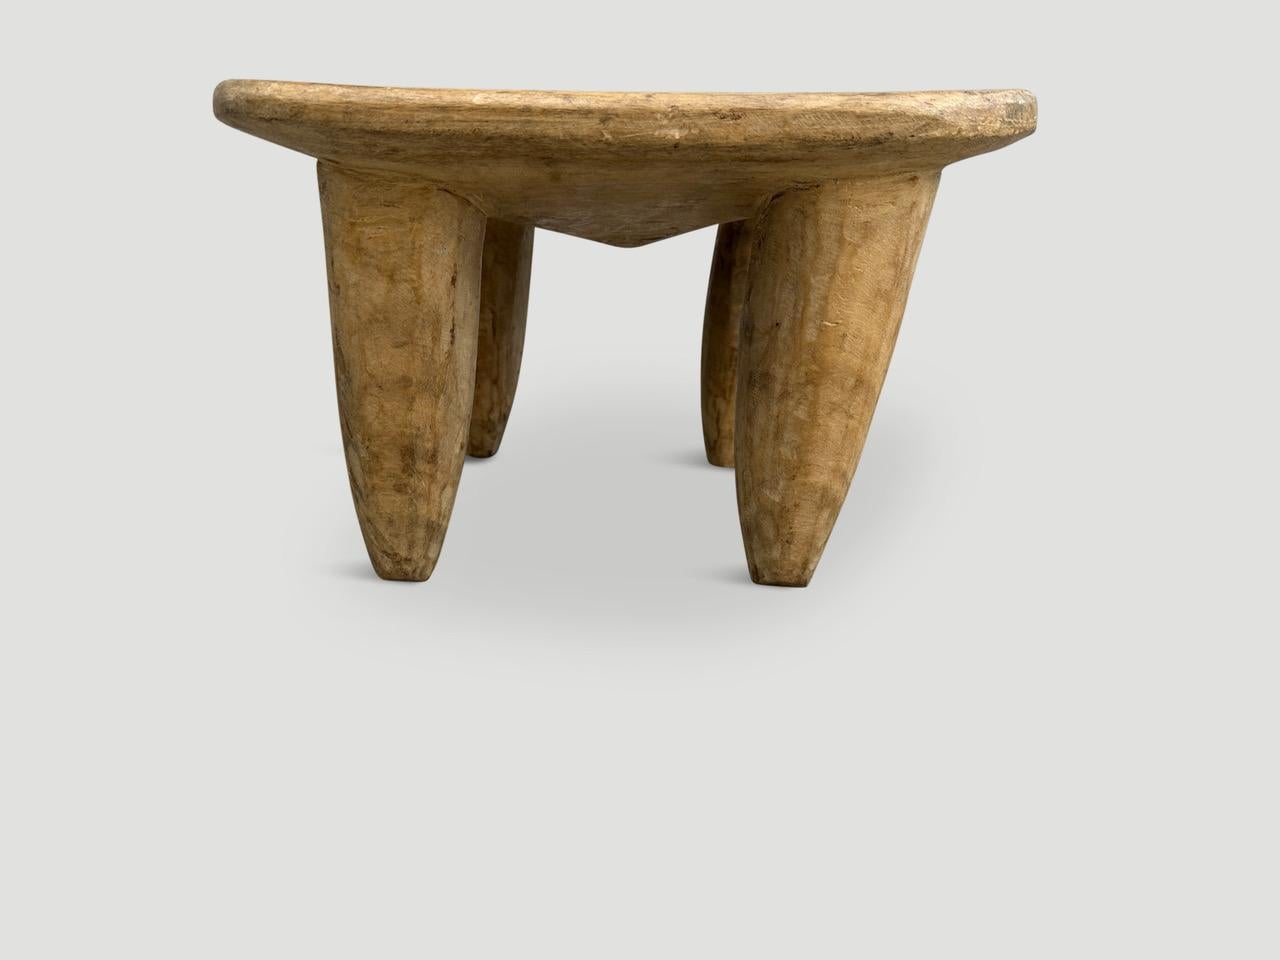 Ivorian Andrianna Shamaris Senufo Side Table or Stool From Côte d’Ivoire For Sale